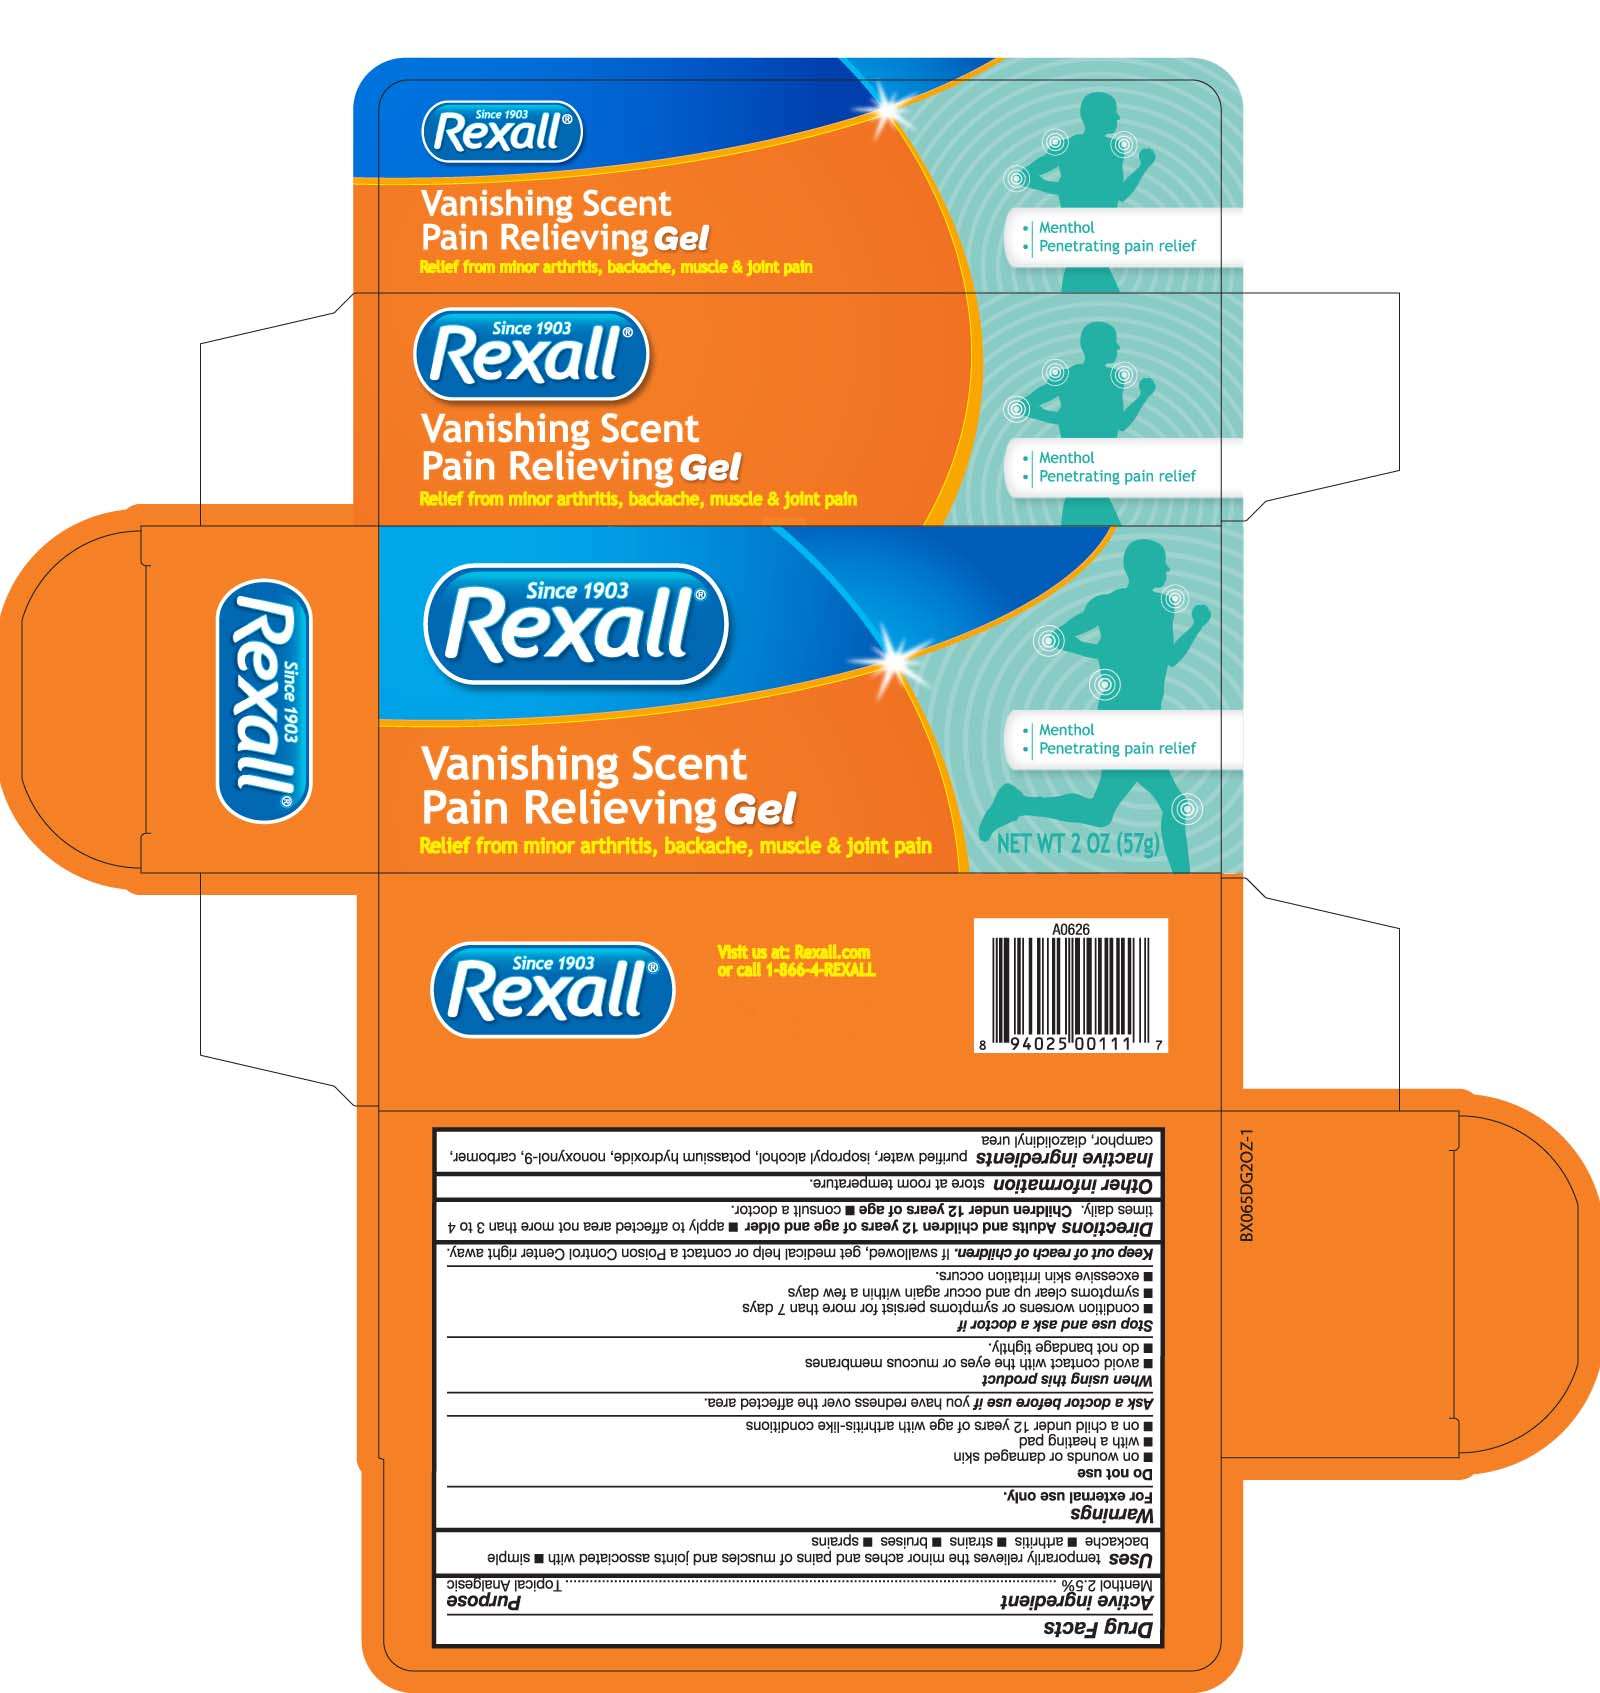 Rexall Vanishing Scent Pain Relieving